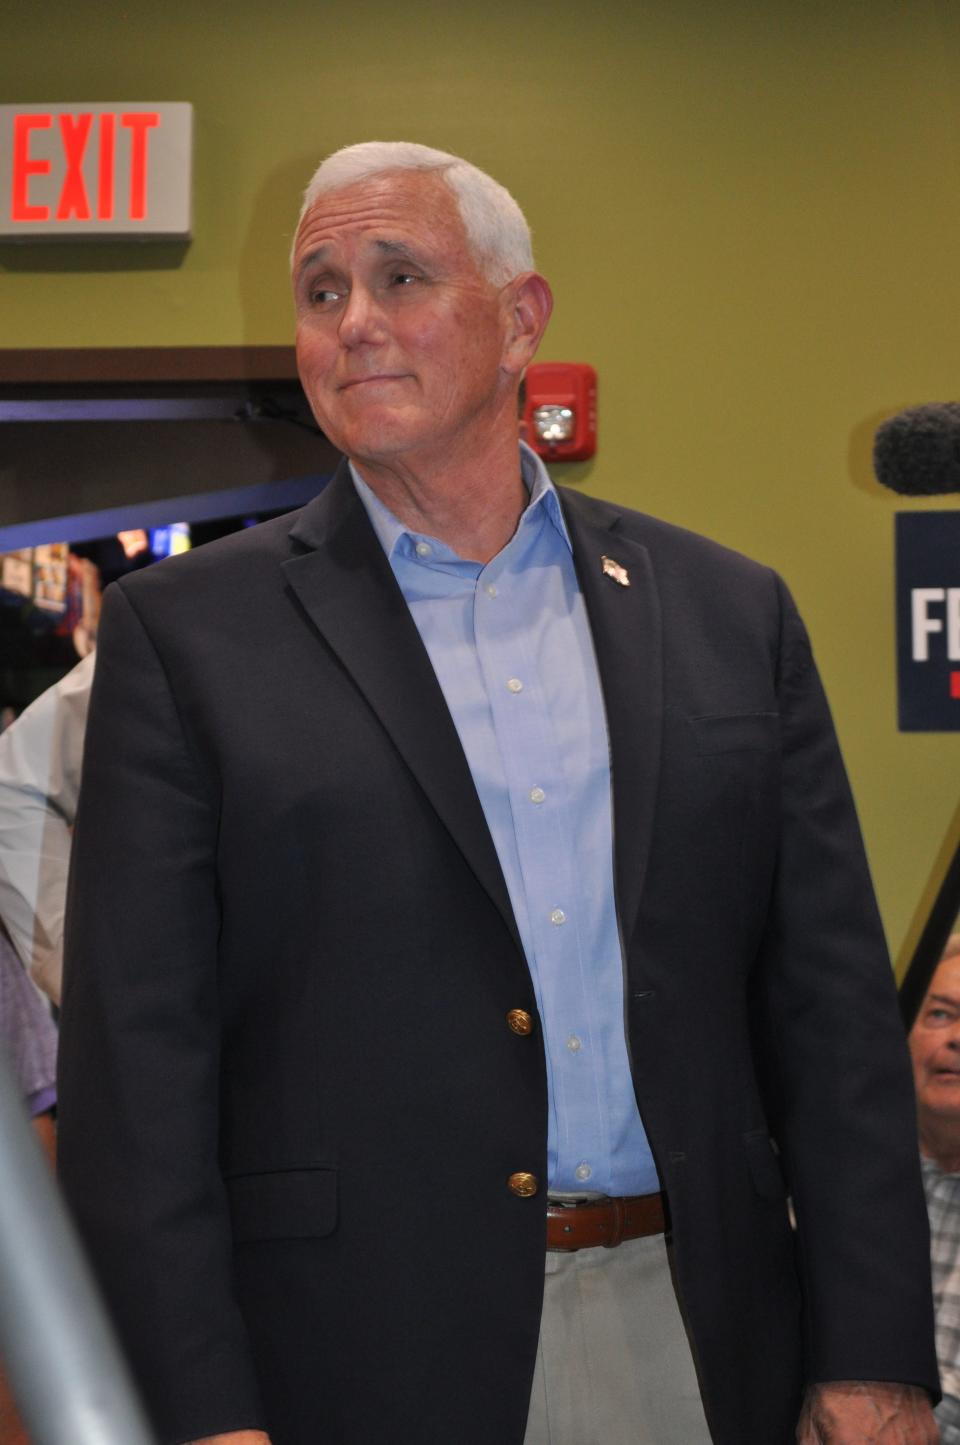 Former Vice President Mike Pence dropped out of the presidential race on Oct. 28.